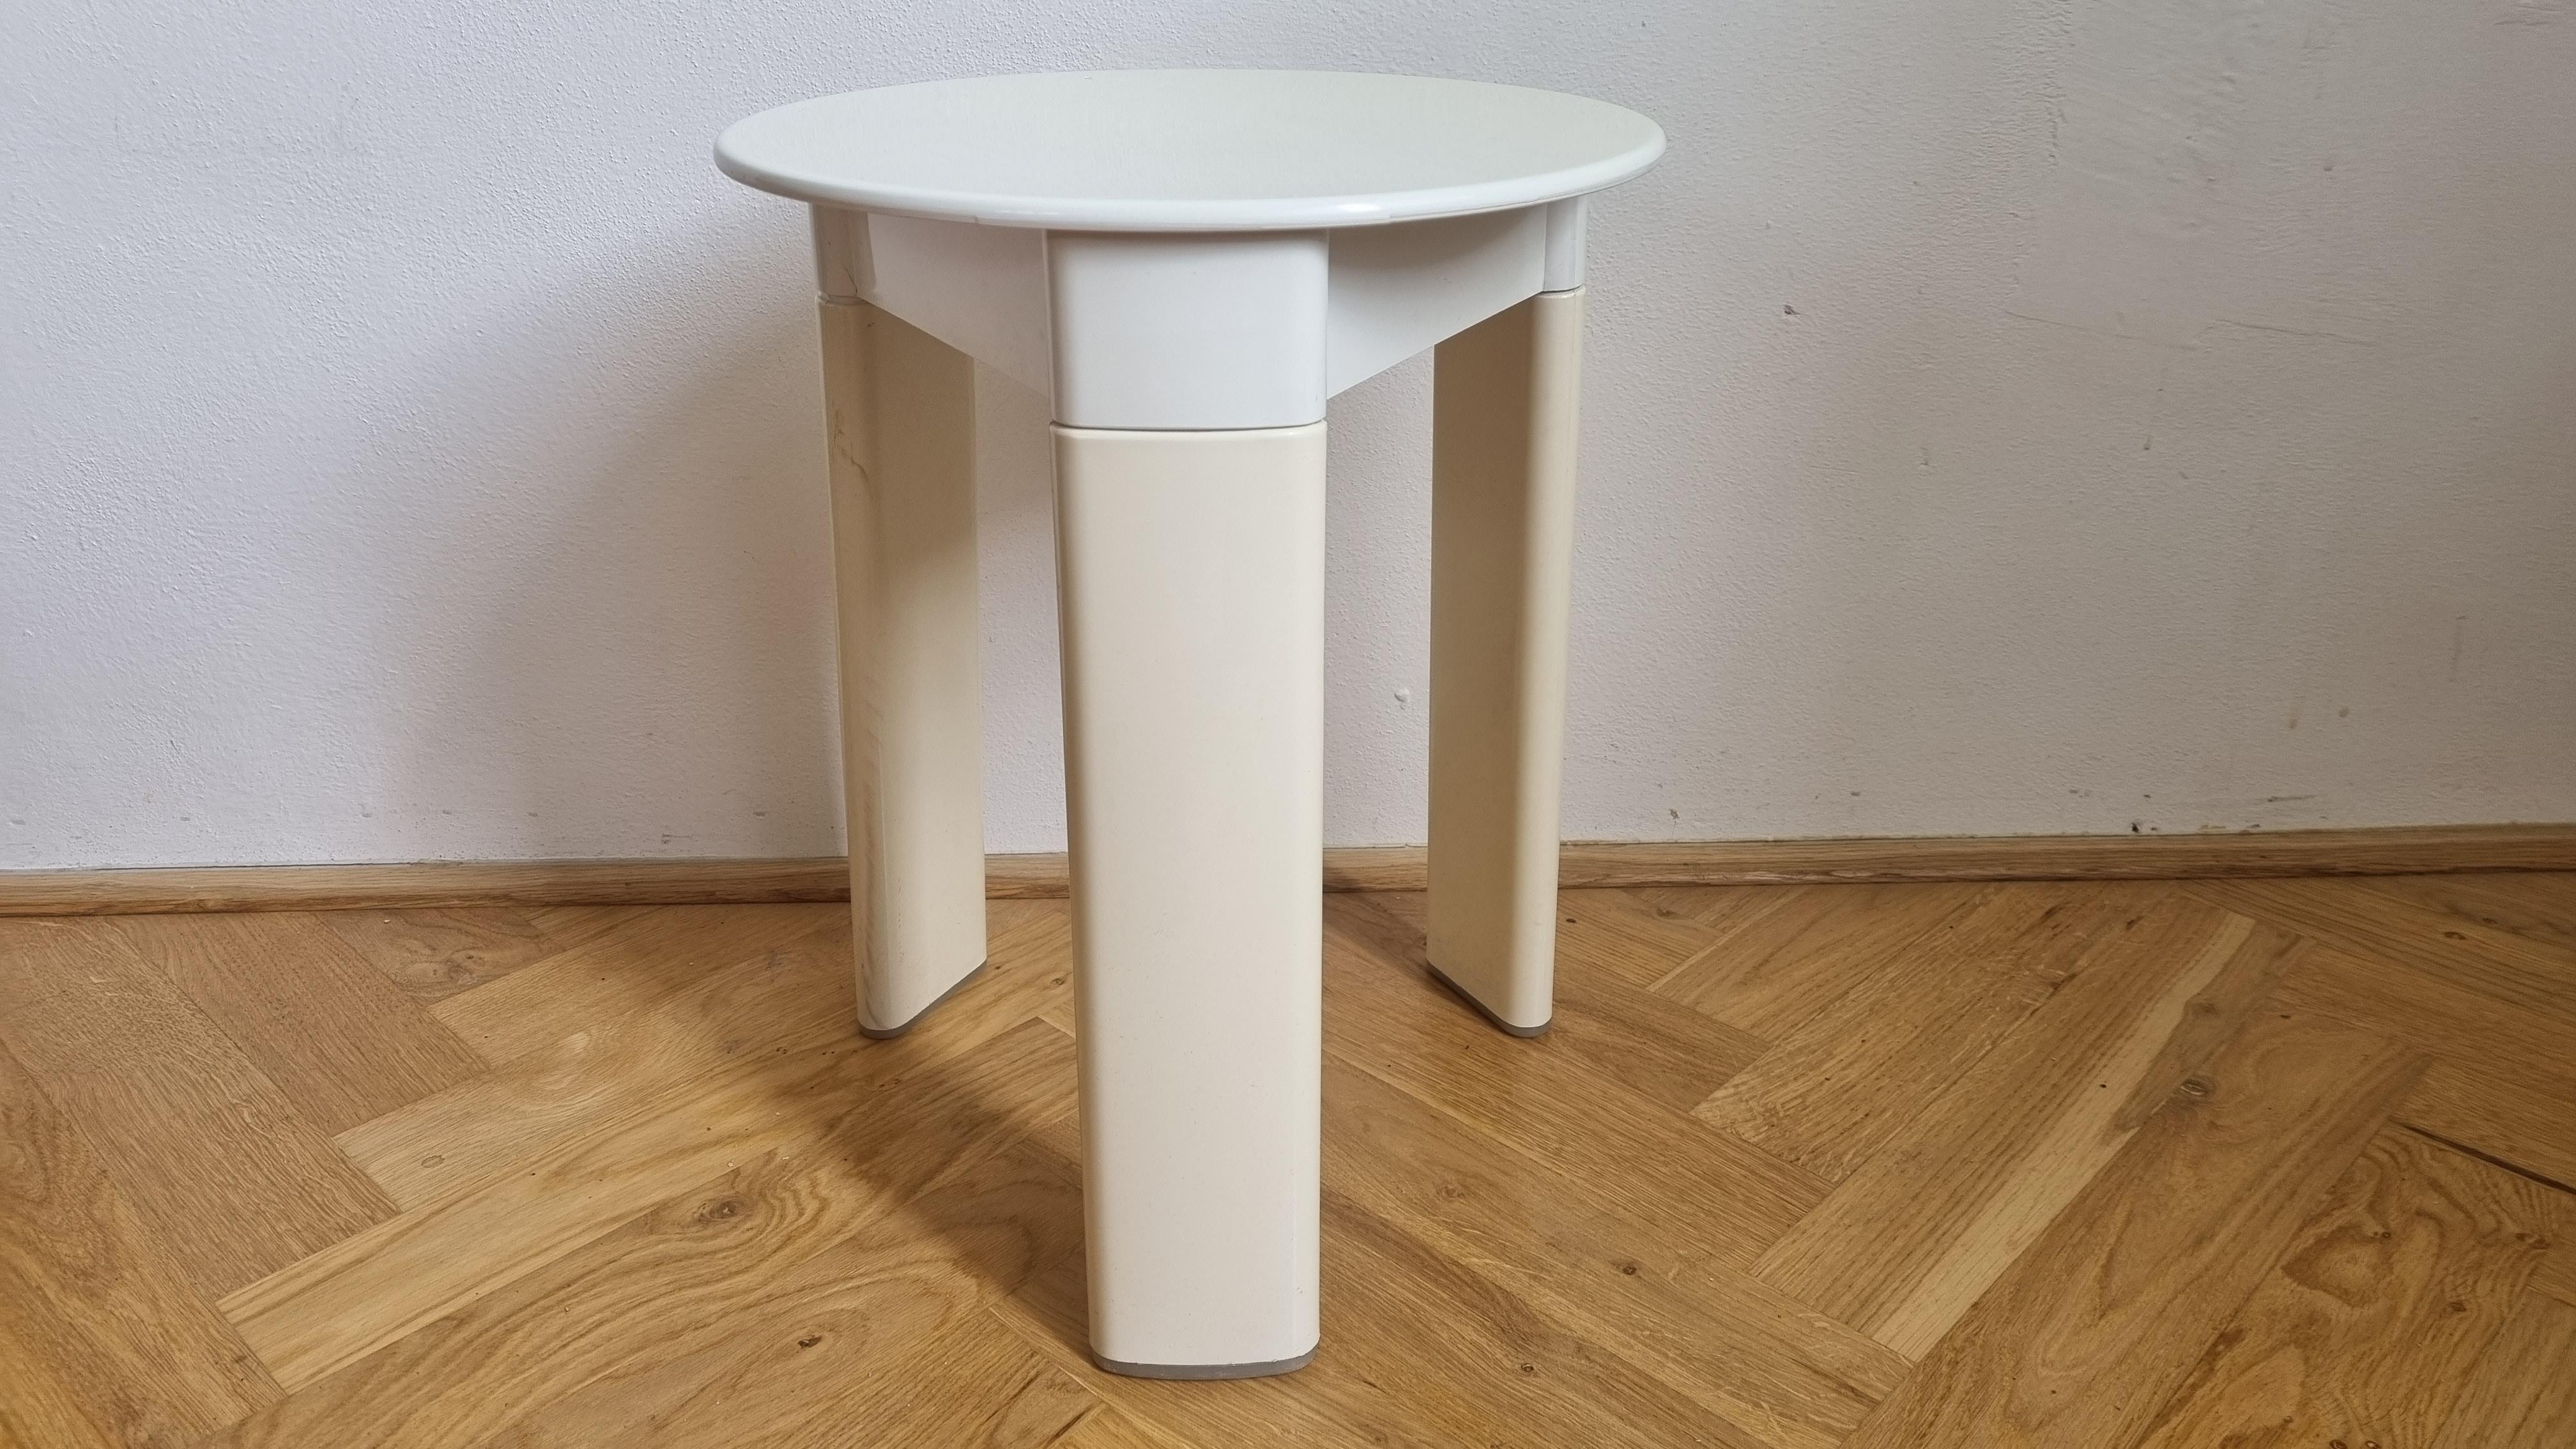 Italian Midcentury Stool or Side Table Trio, Olaf Von Bohr for Gedy, Italy, 1970s For Sale